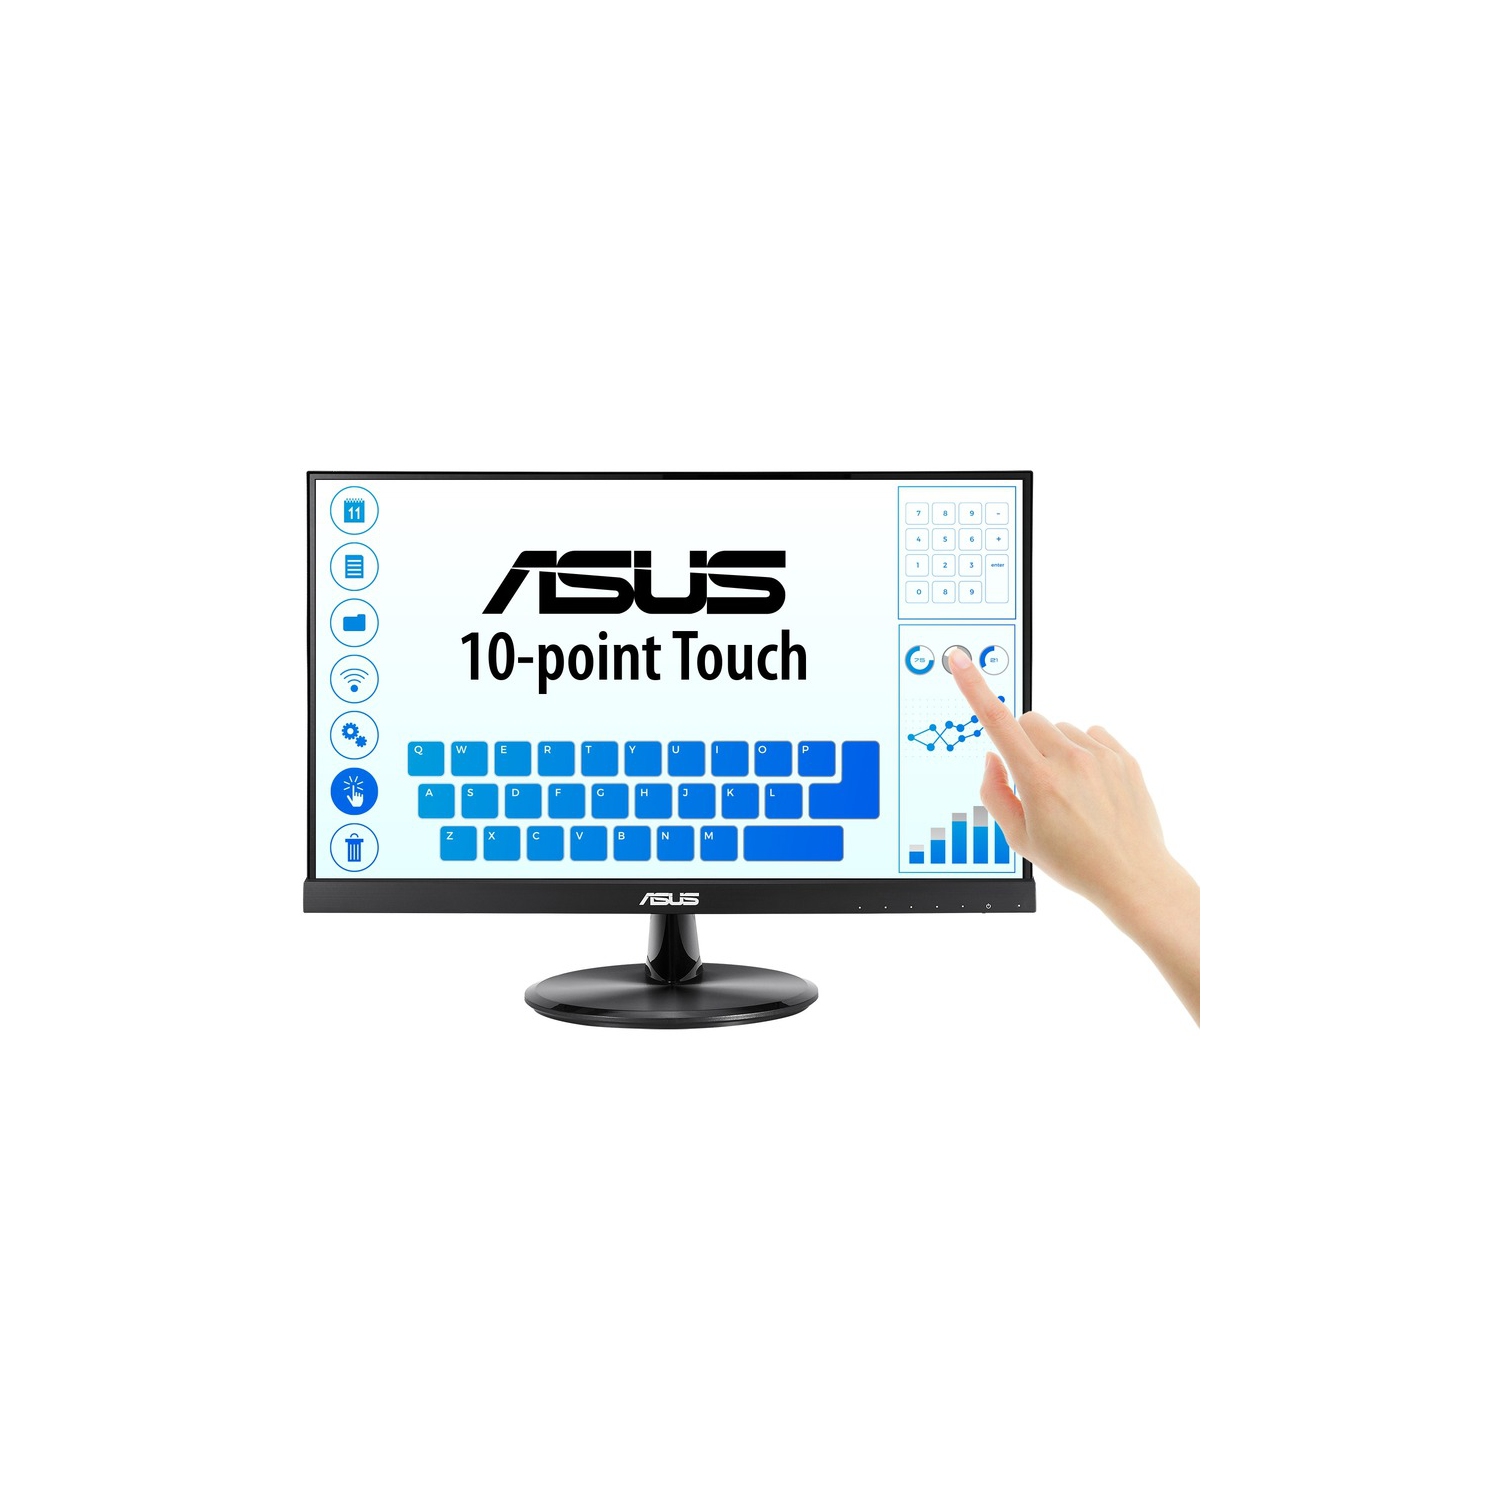 Asus VT229H 21.5" Full HD IPS Touchscreen Monitor with 10-Point Multi-Touch and Eye Care Technology